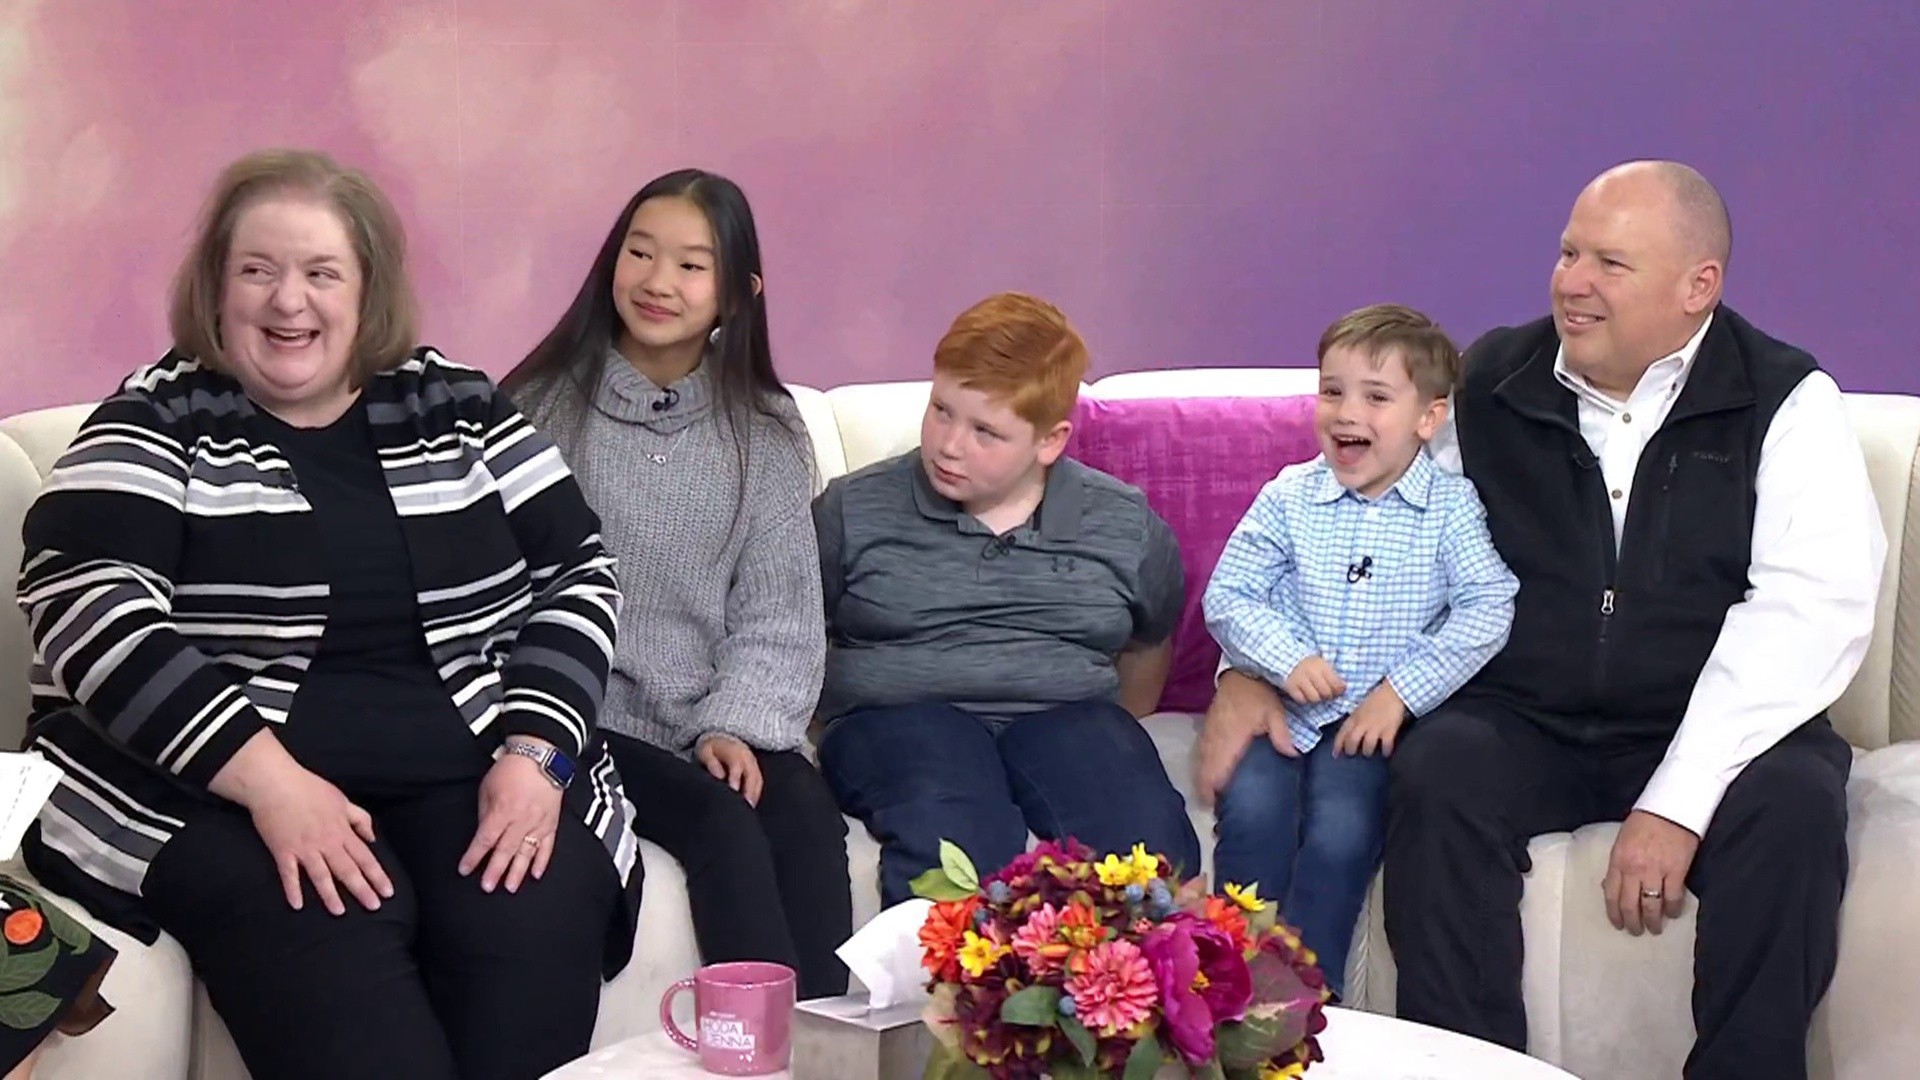 Family of 3 becomes family of 5 with incredible adoption story